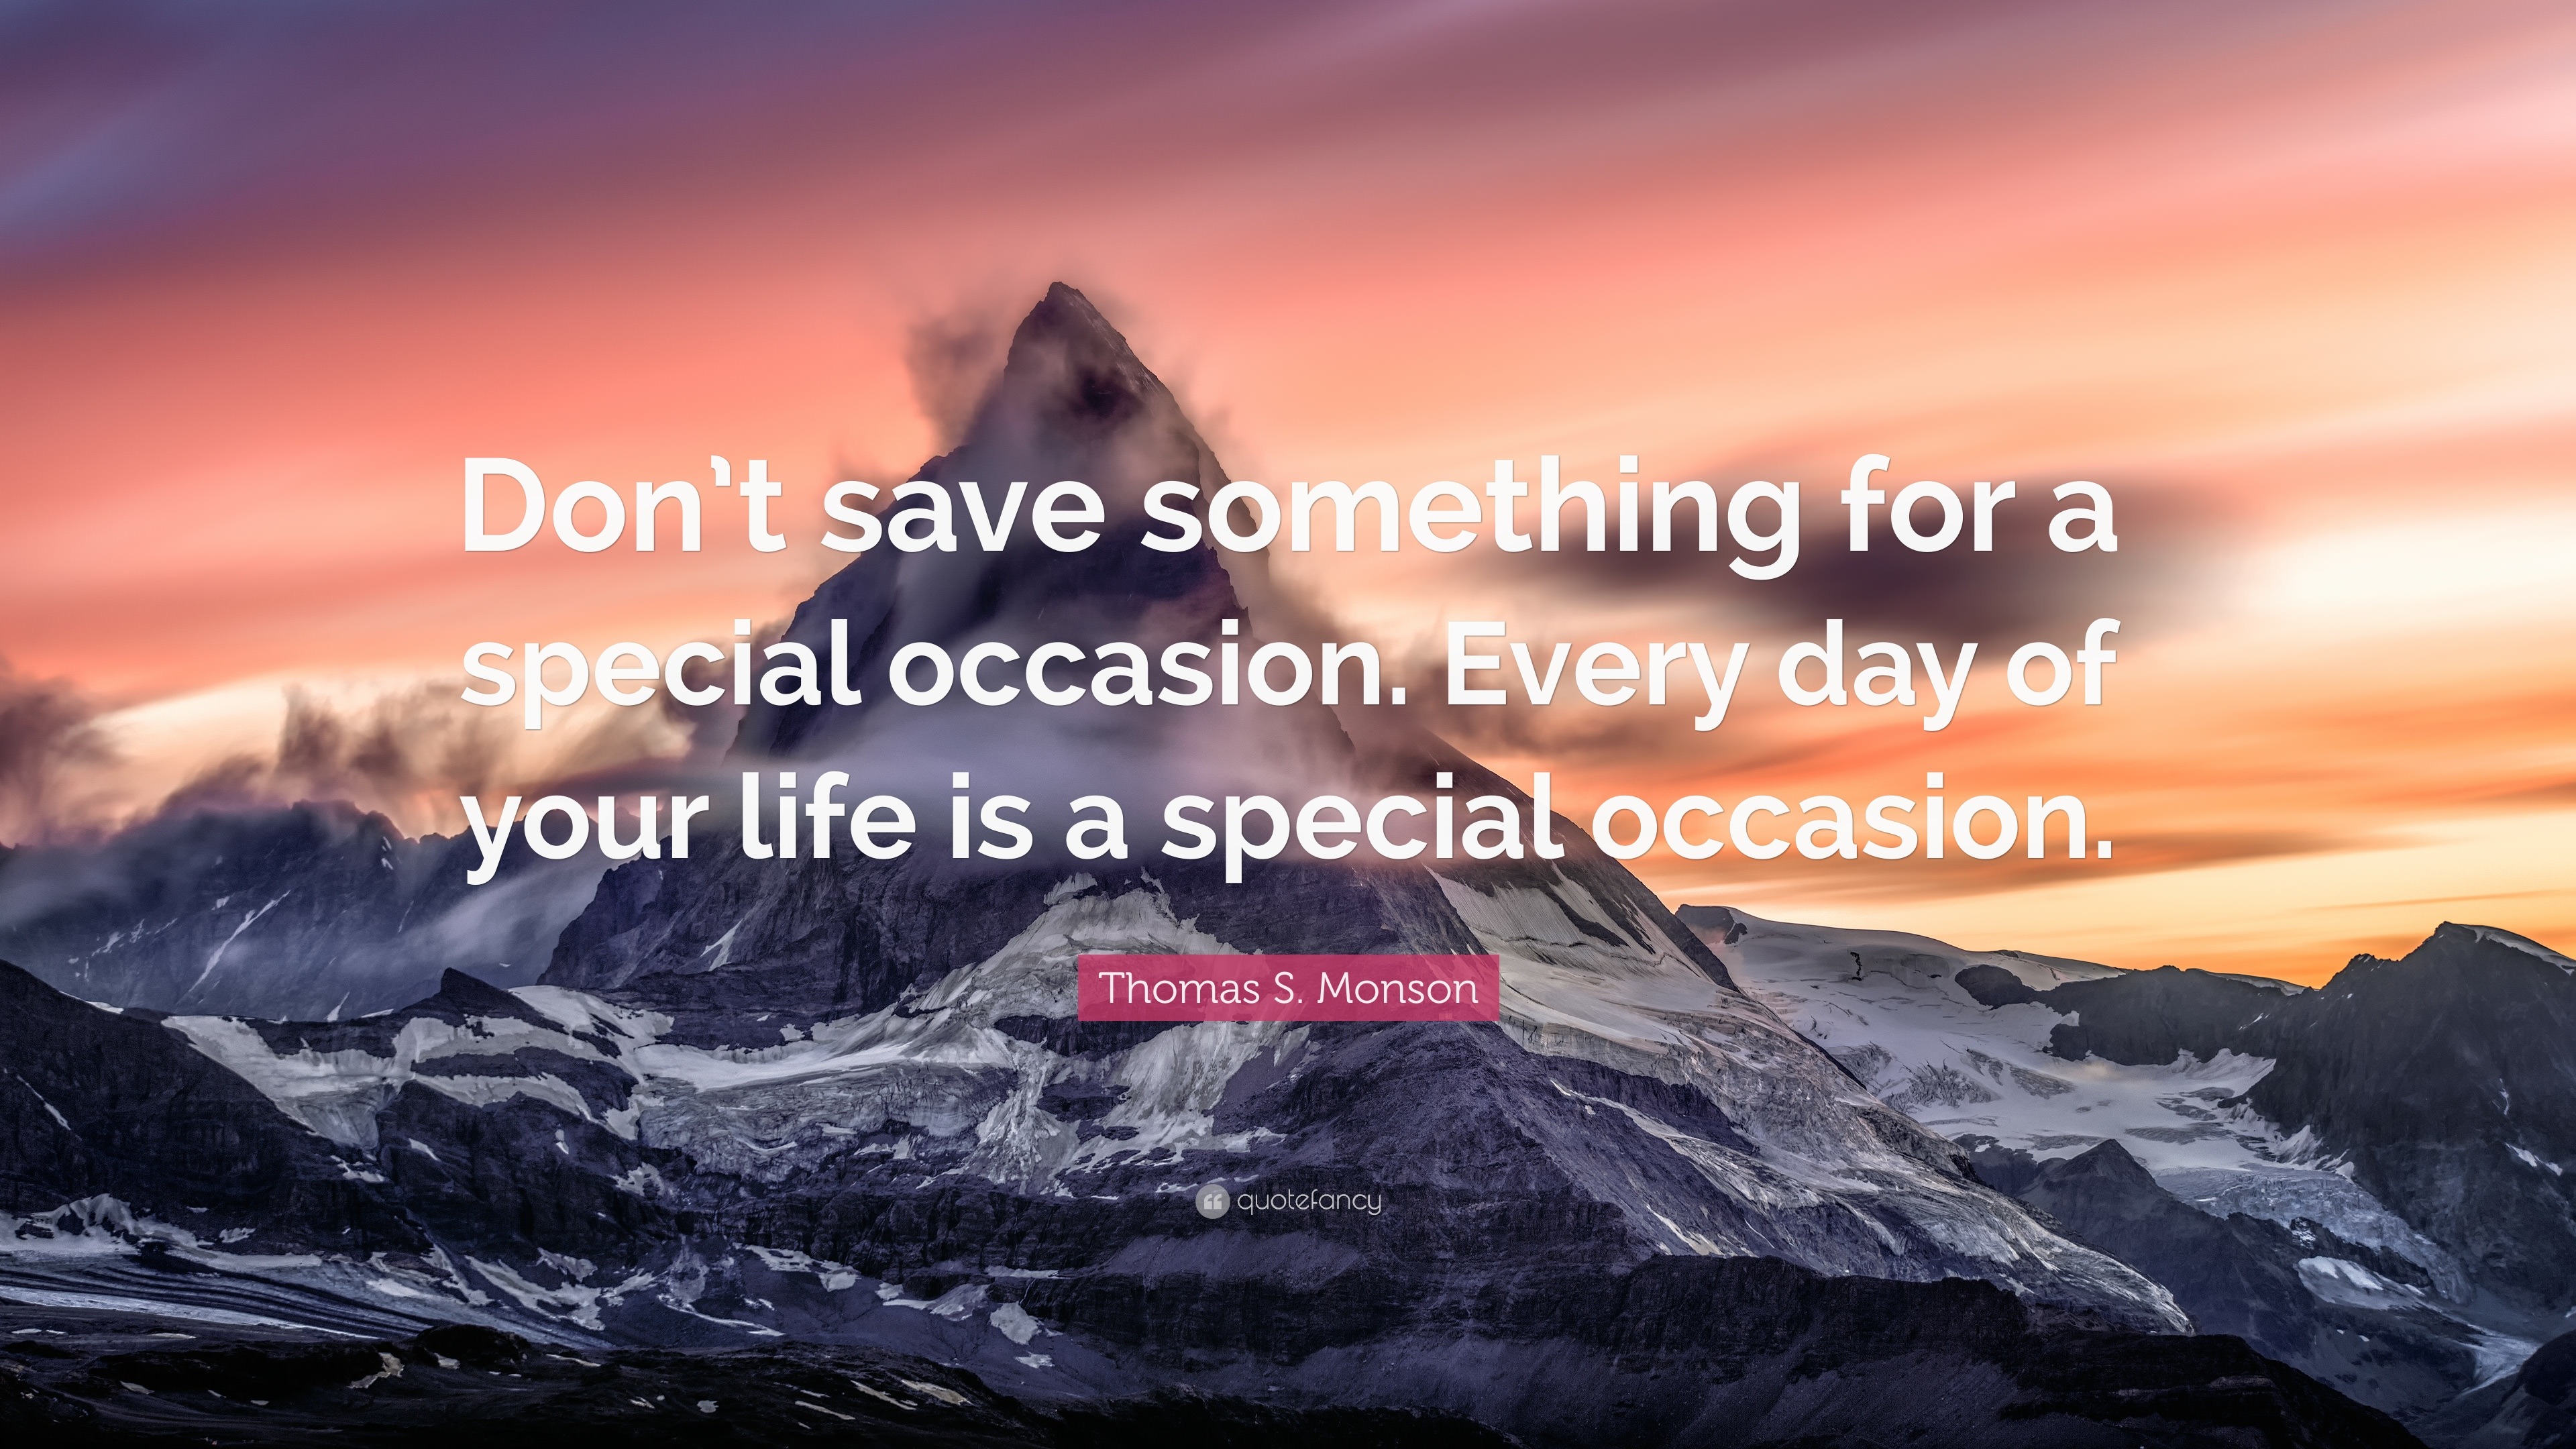 Thomas S. Monson Quote: “Don't save something for a special occasion. Every  day of your